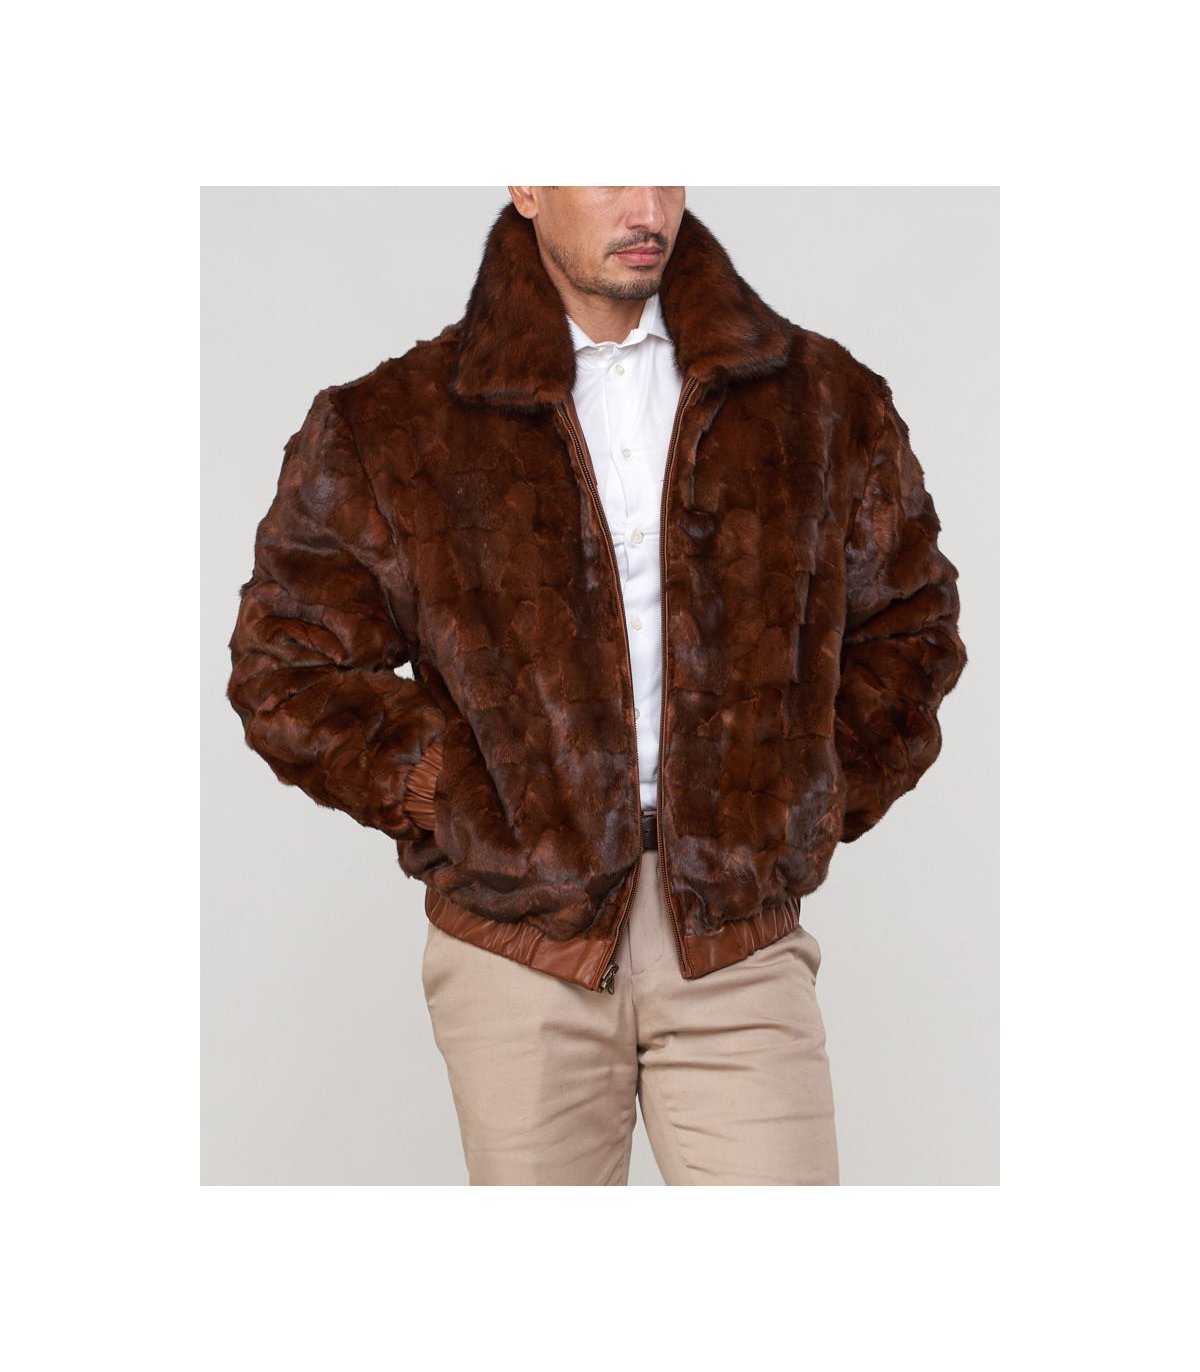 Mink Fur Bomber Jacket Reversible to Leather in Whiskey: FurSource.com